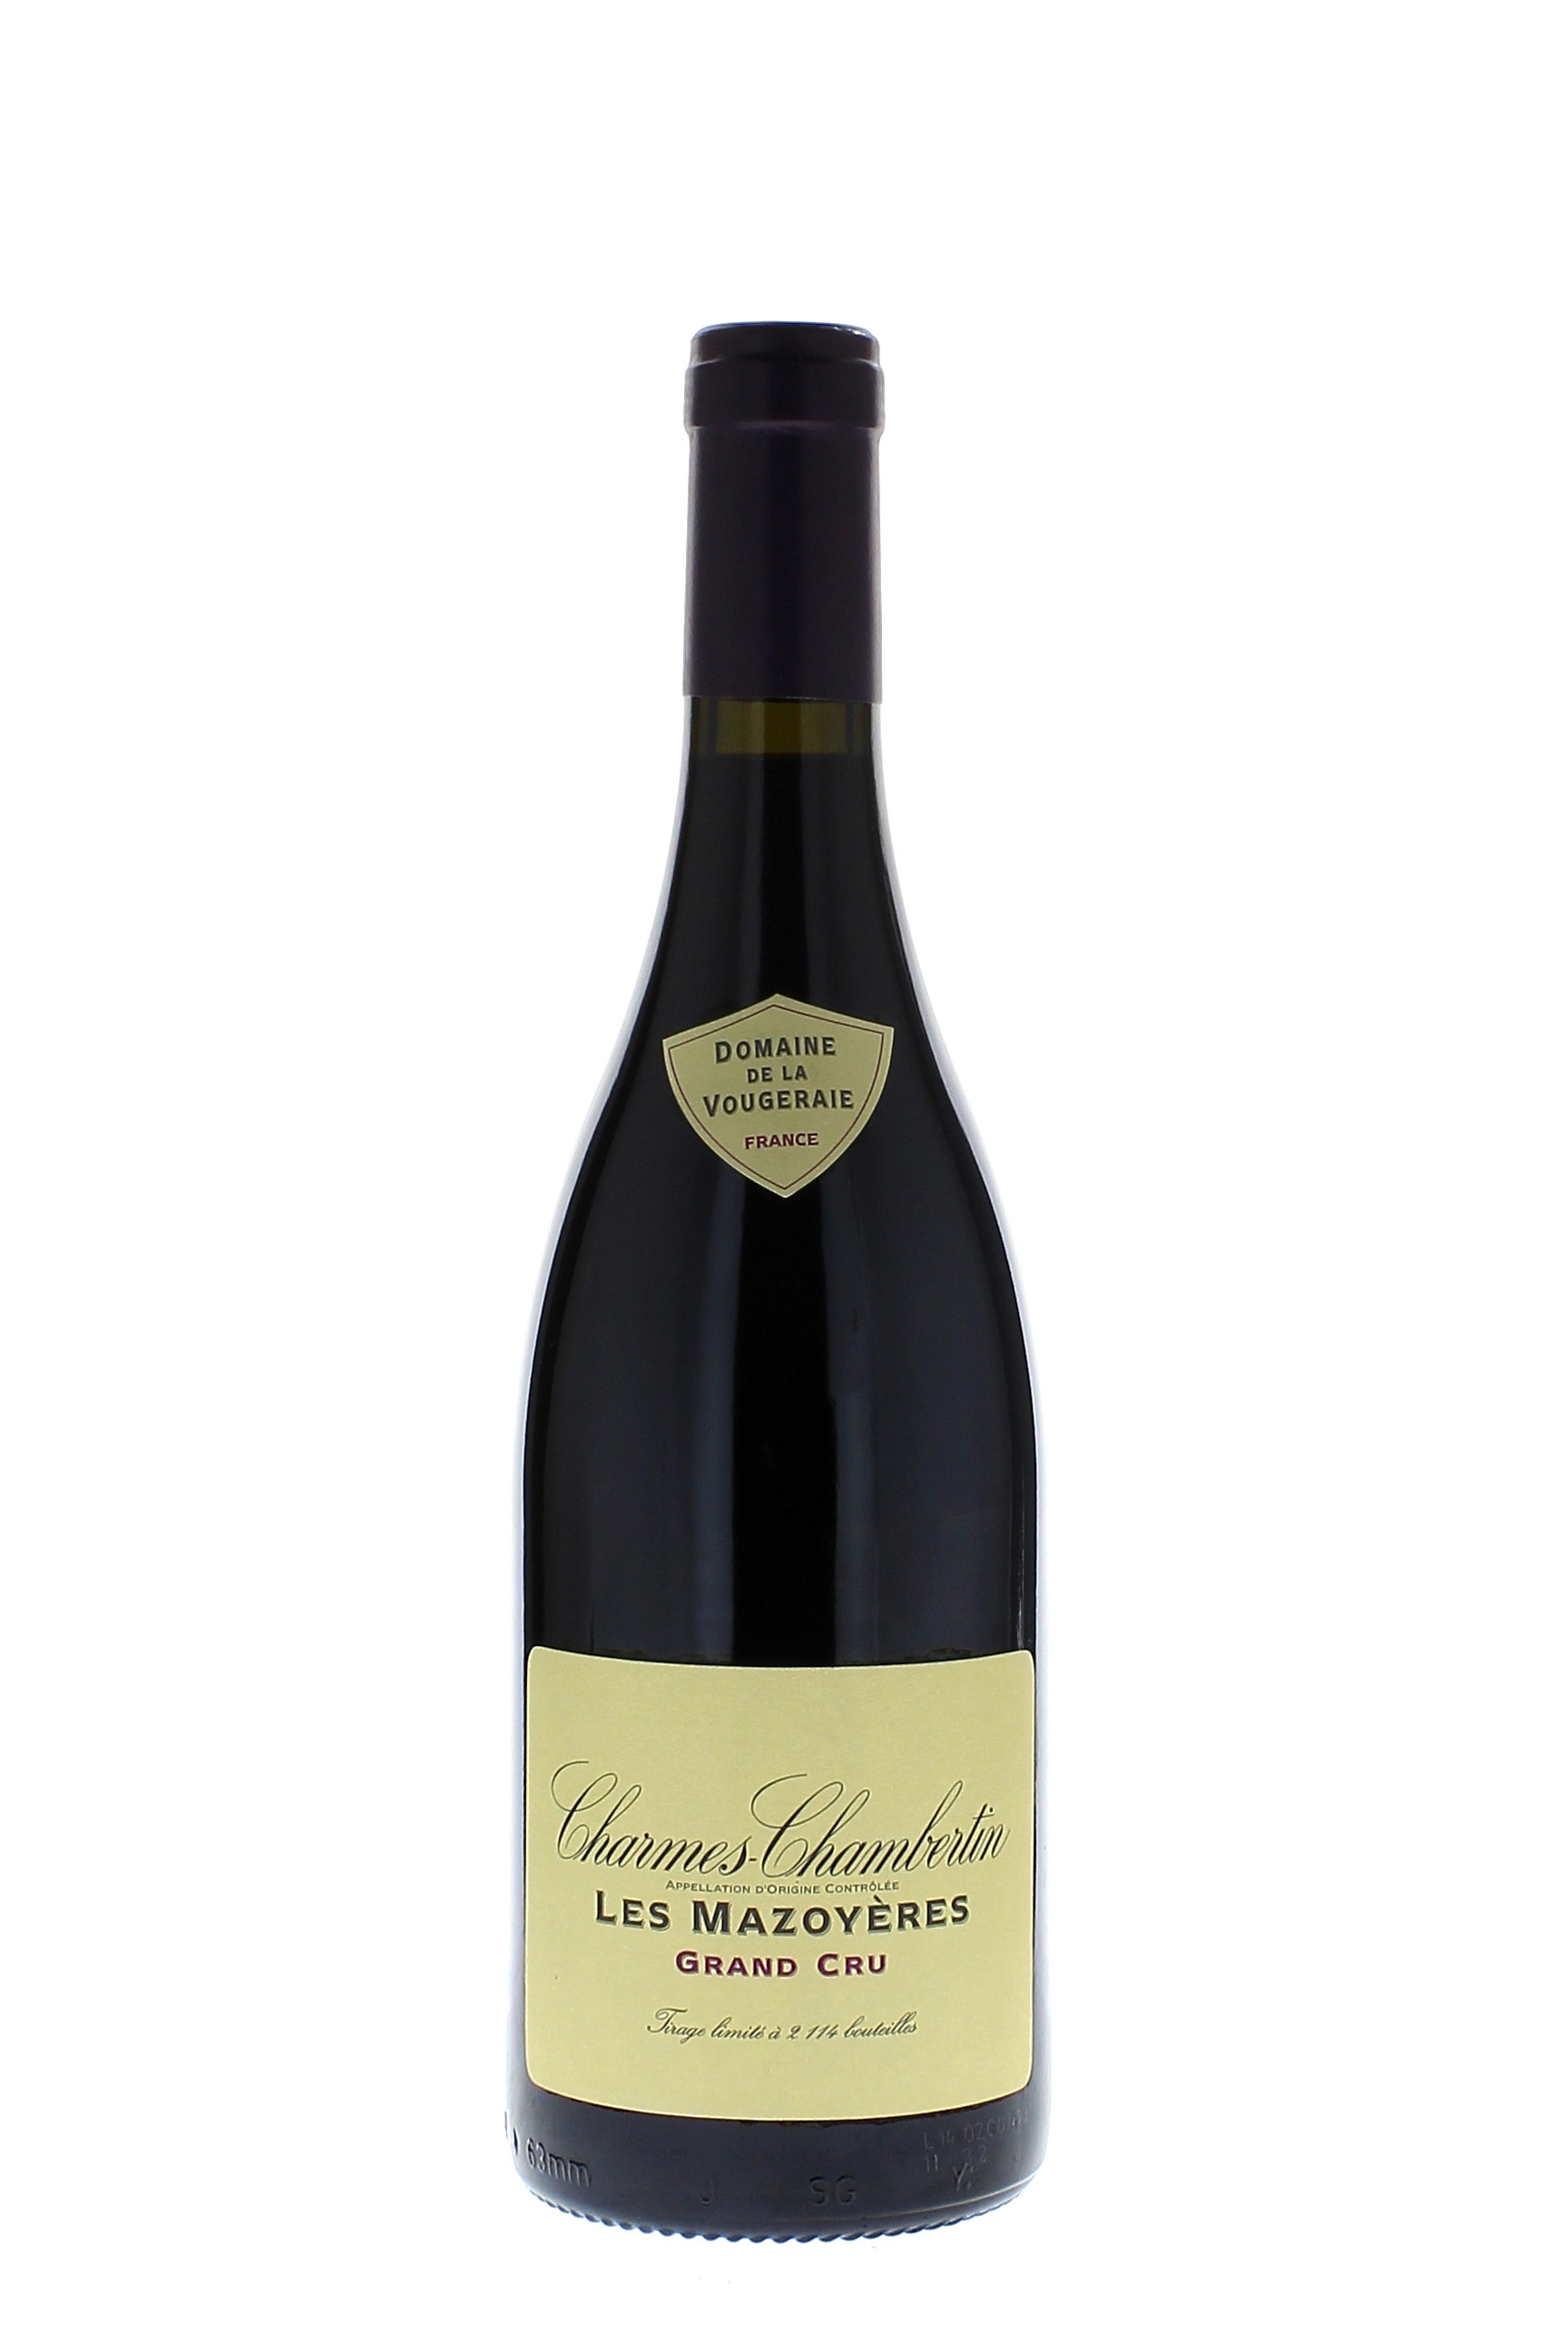 Charmes chambertin les mazoyres 2013 Domaine VOUGERAIE, Bourgogne rouge